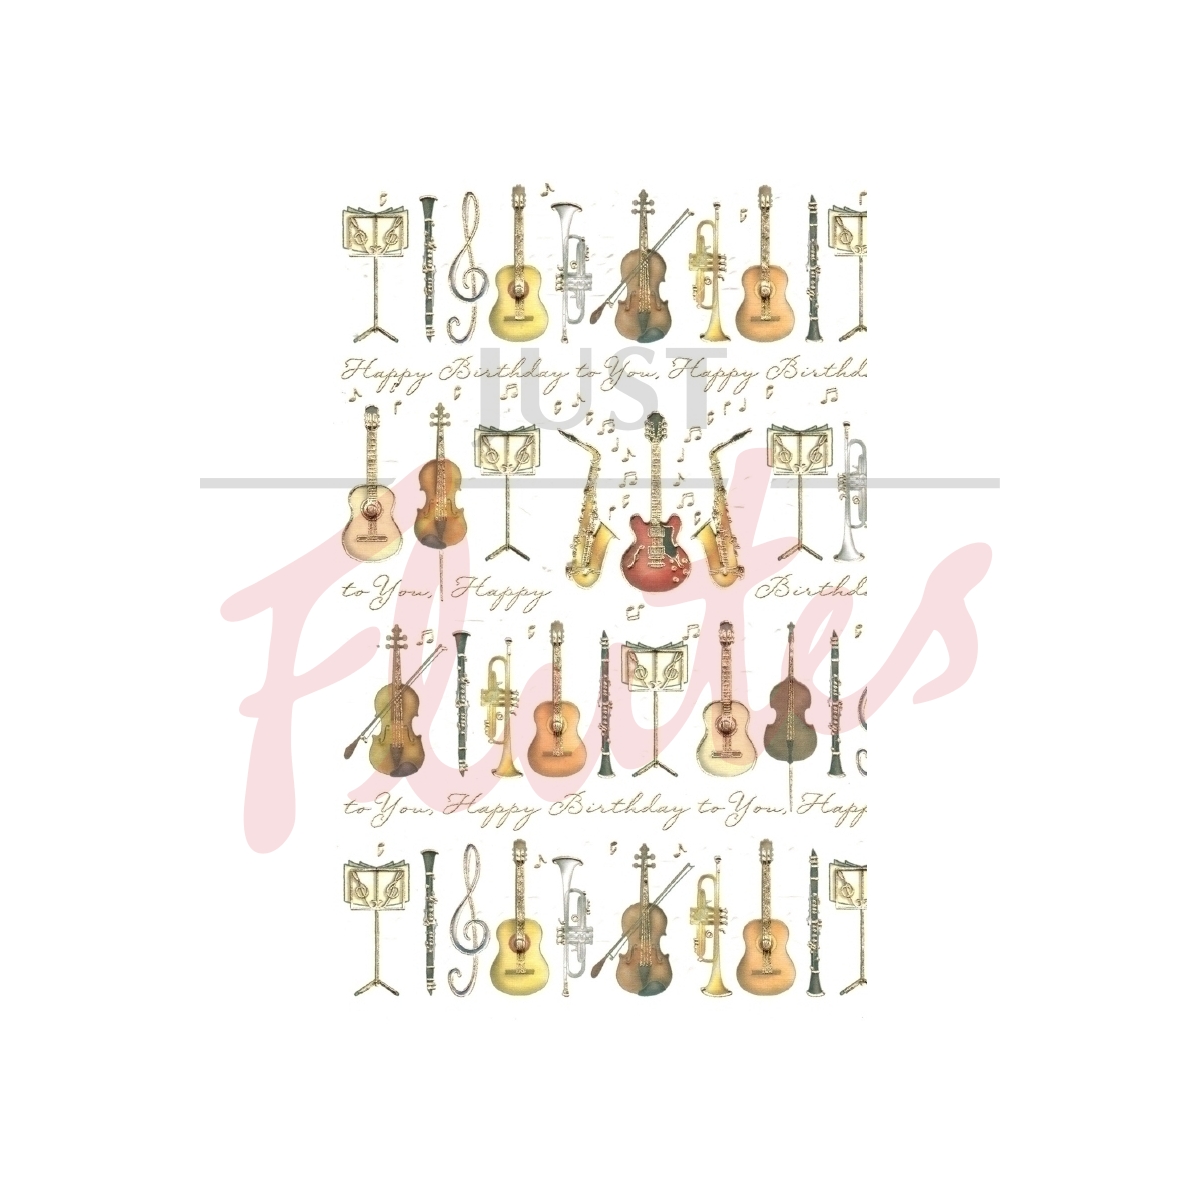 Mixed Musical Instruments Greetings Card